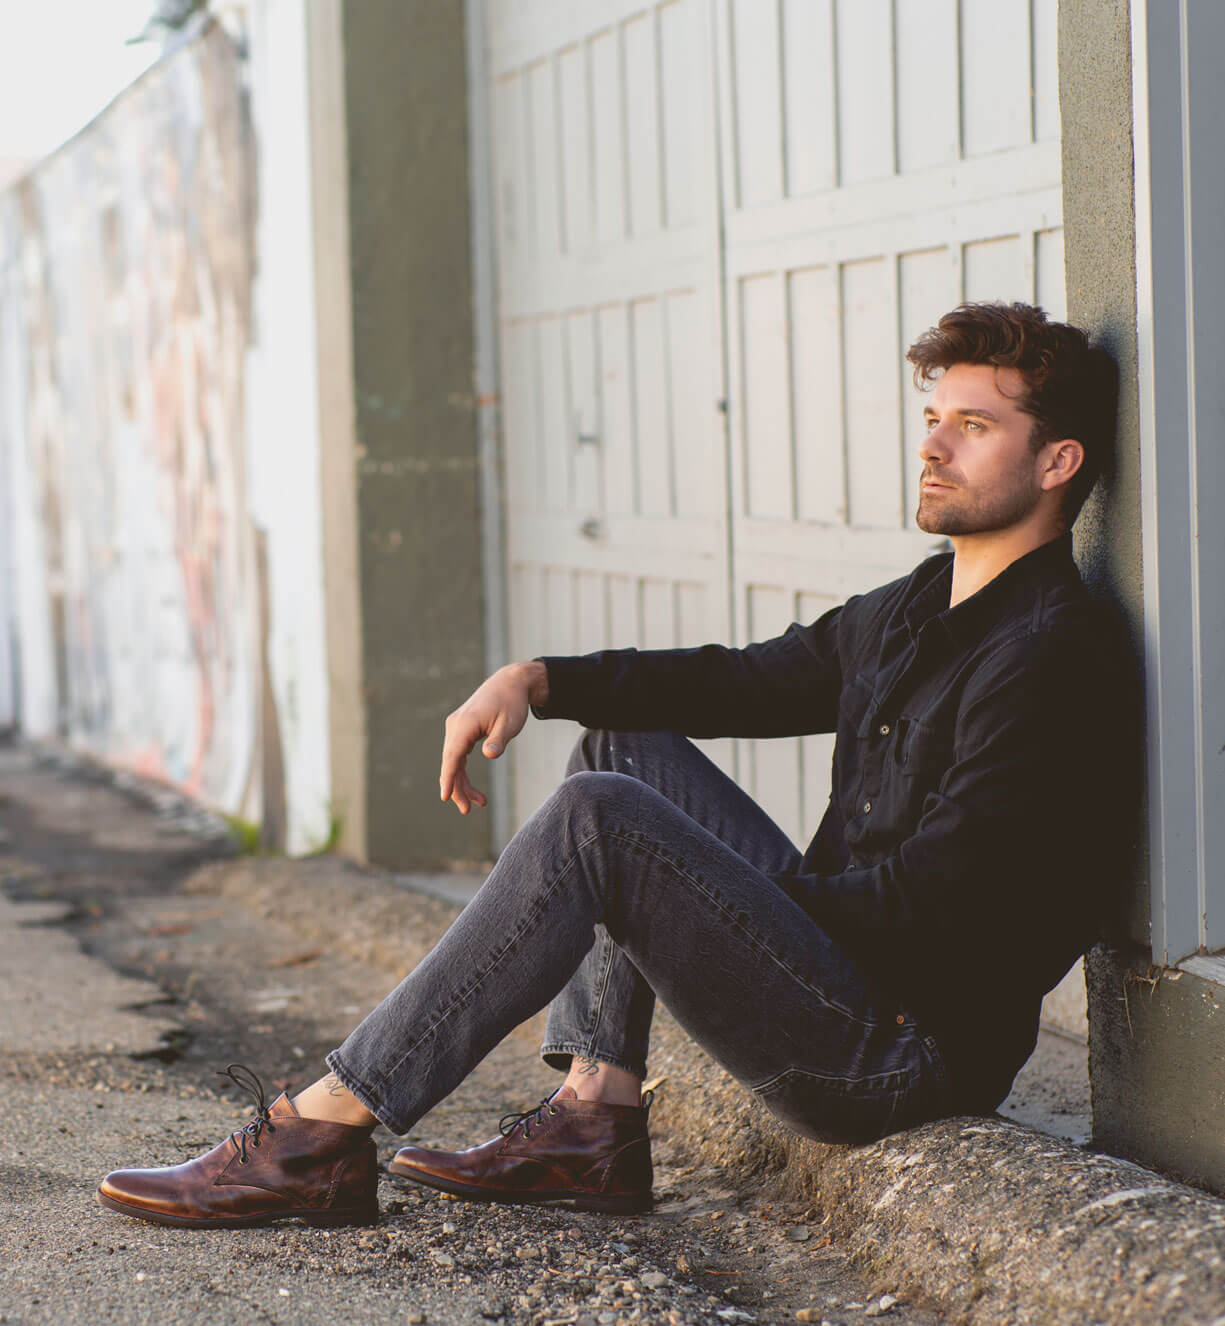 A man sitting on the ground, leaning against a wall, wearing a black shirt, jeans, and Bed Stu Illiad leather chukka boots made of vegetable-tanned leather, looking thoughtfully to the side.